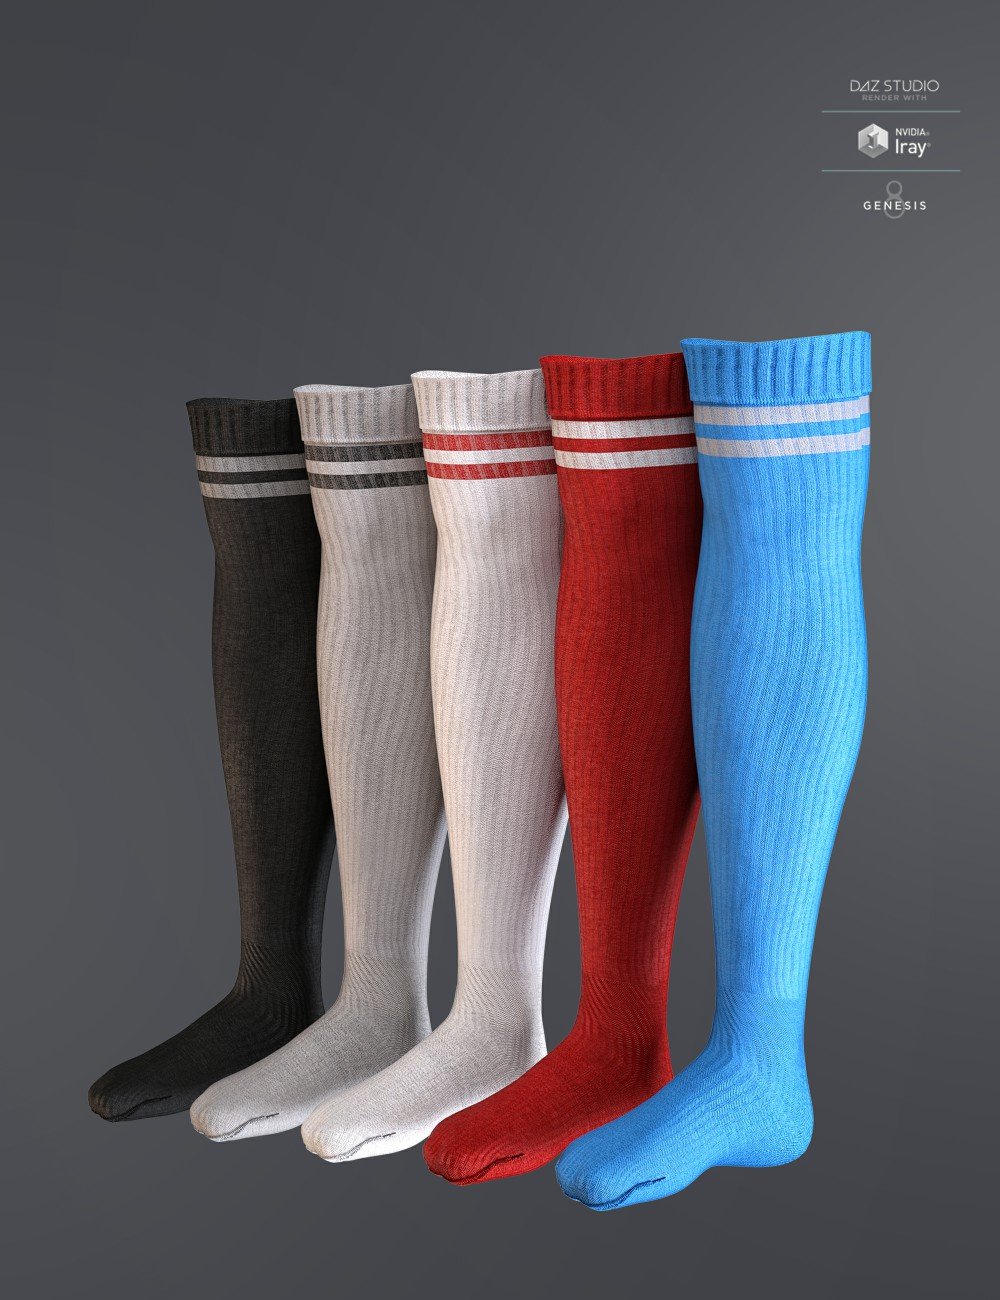 AJC Pro Skate Sneakers and Socks for Genesis 8 and 8.1 Females by: adeilsonjc, 3D Models by Daz 3D